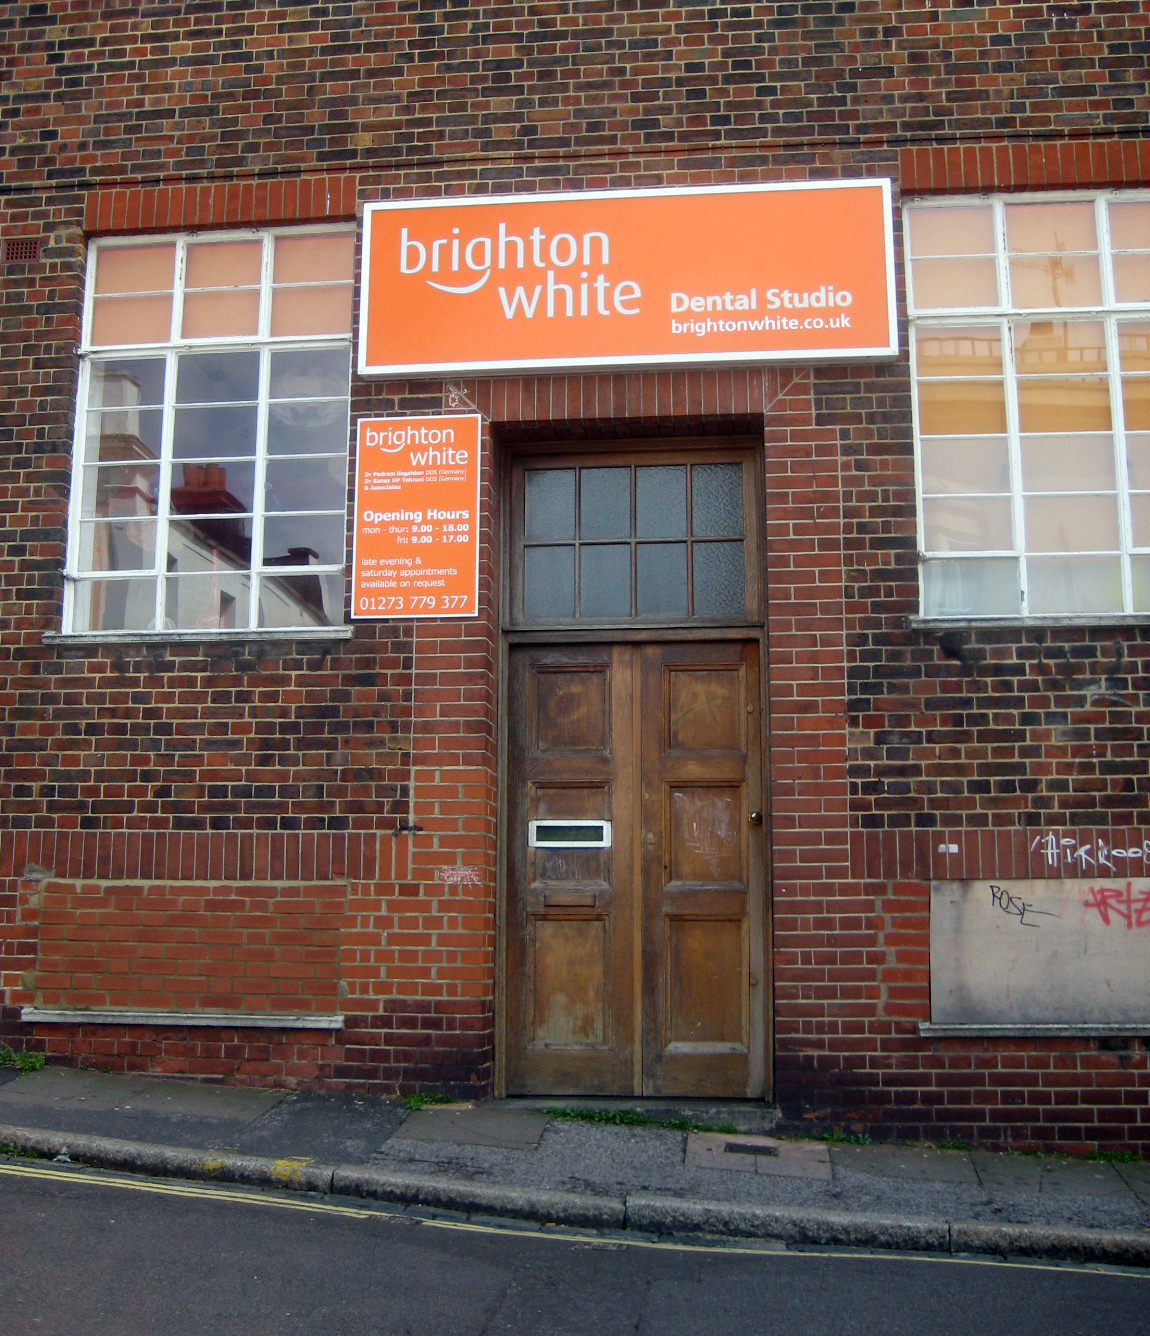 brick building with a sign that reads brighton white